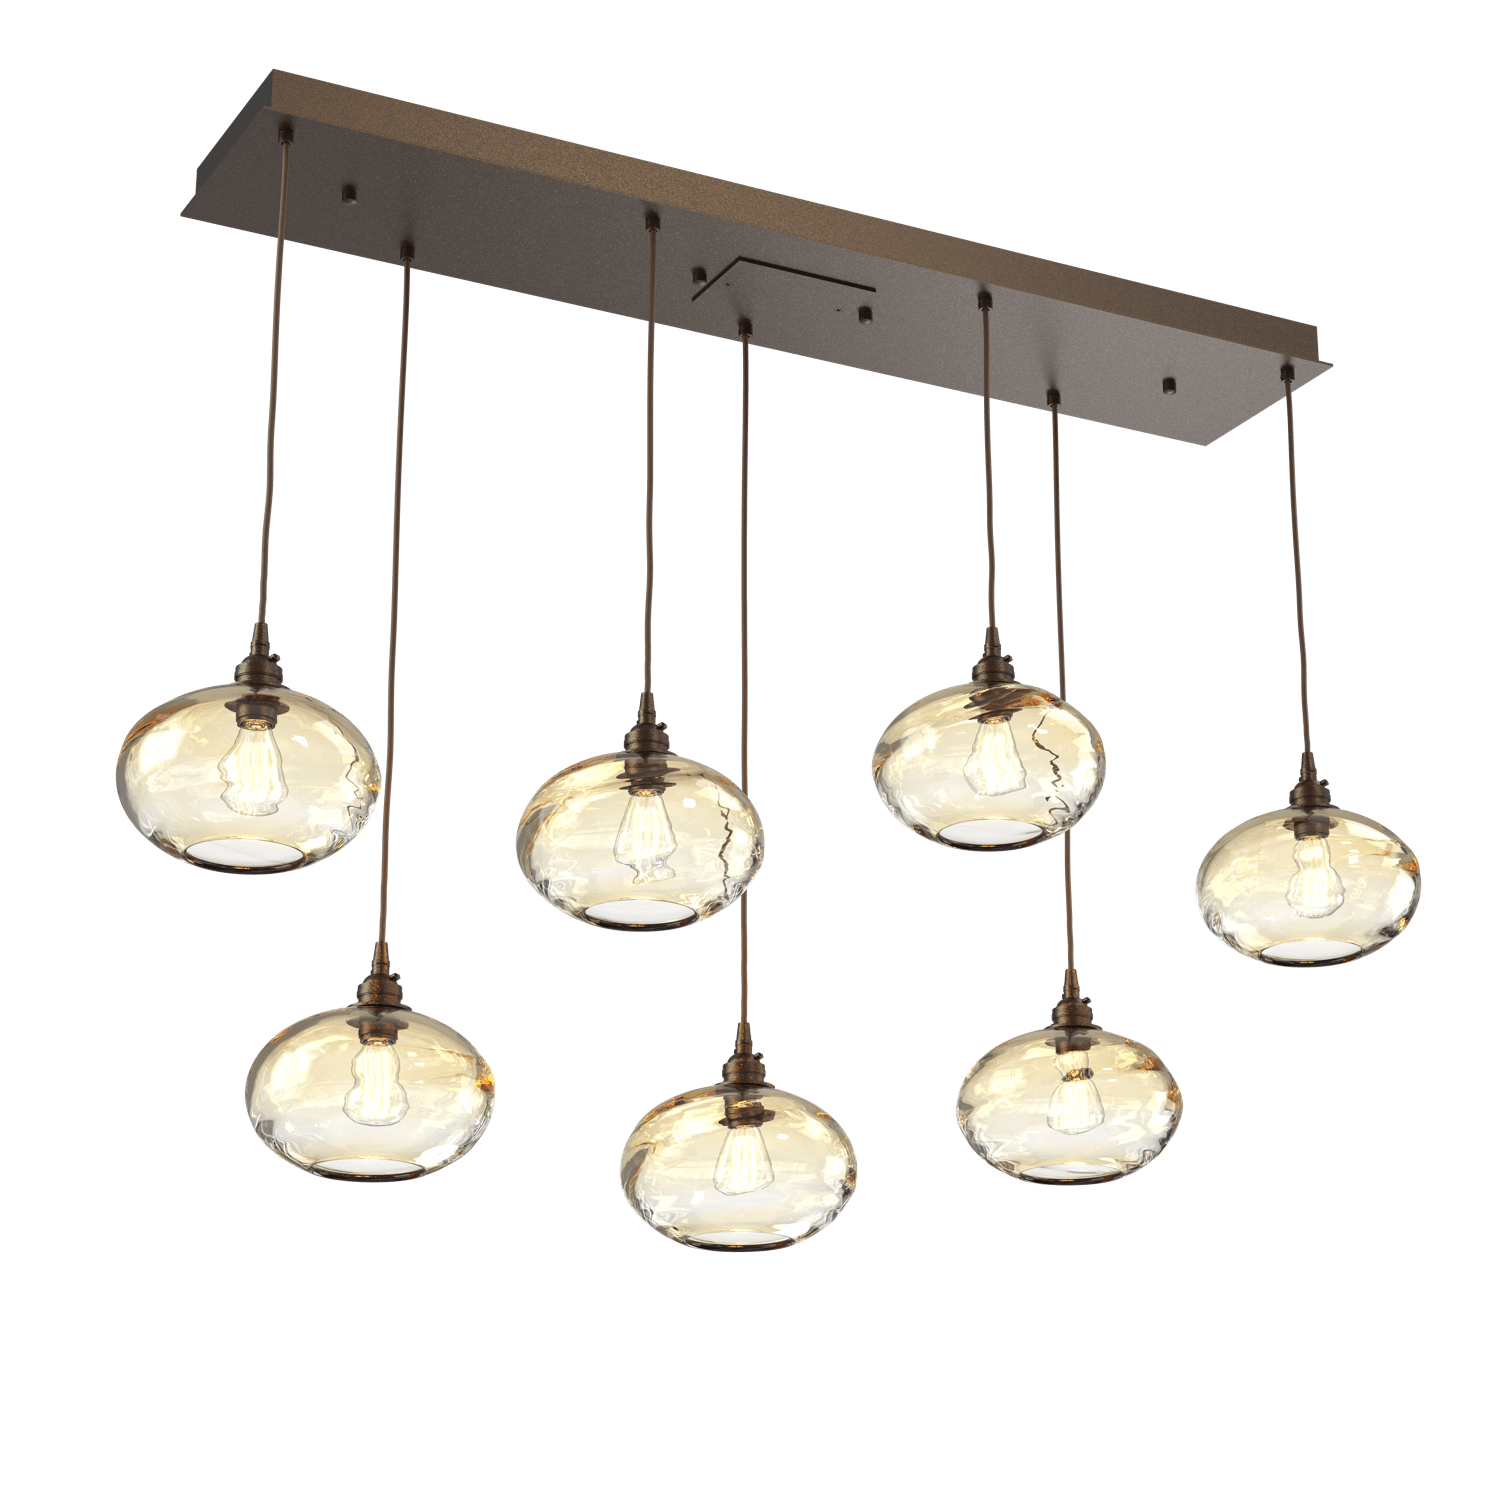 PLB0036-07-FB-OA-Hammerton-Studio-Optic-Blown-Glass-Coppa-7-light-linear-pendant-chandelier-with-flat-bronze-finish-and-optic-amber-blown-glass-shades-and-incandescent-lamping